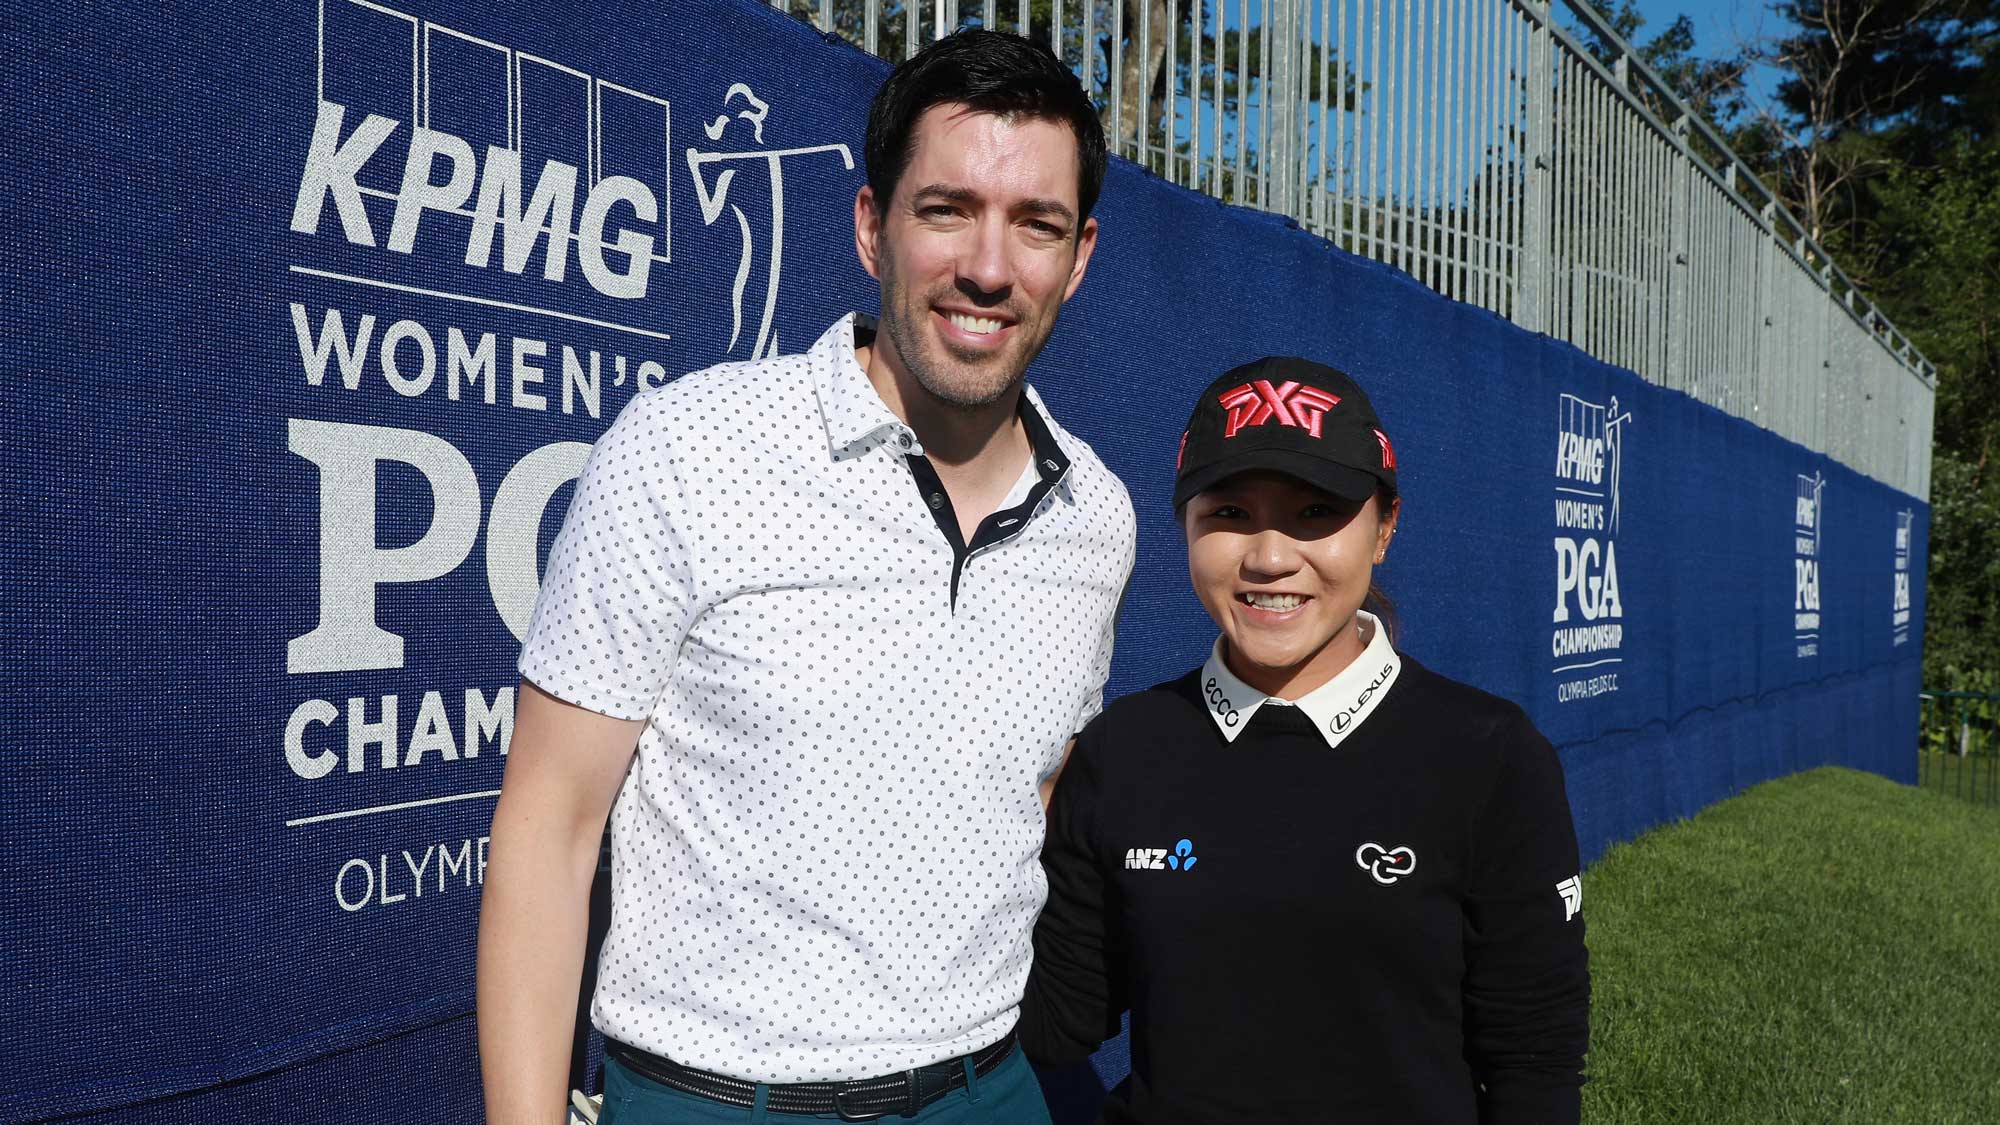 Drew Scott of HGTV (L) poses with Lydia Ko during the pro-am prior to the start of the 2017 KPMG Women's PGA Championship